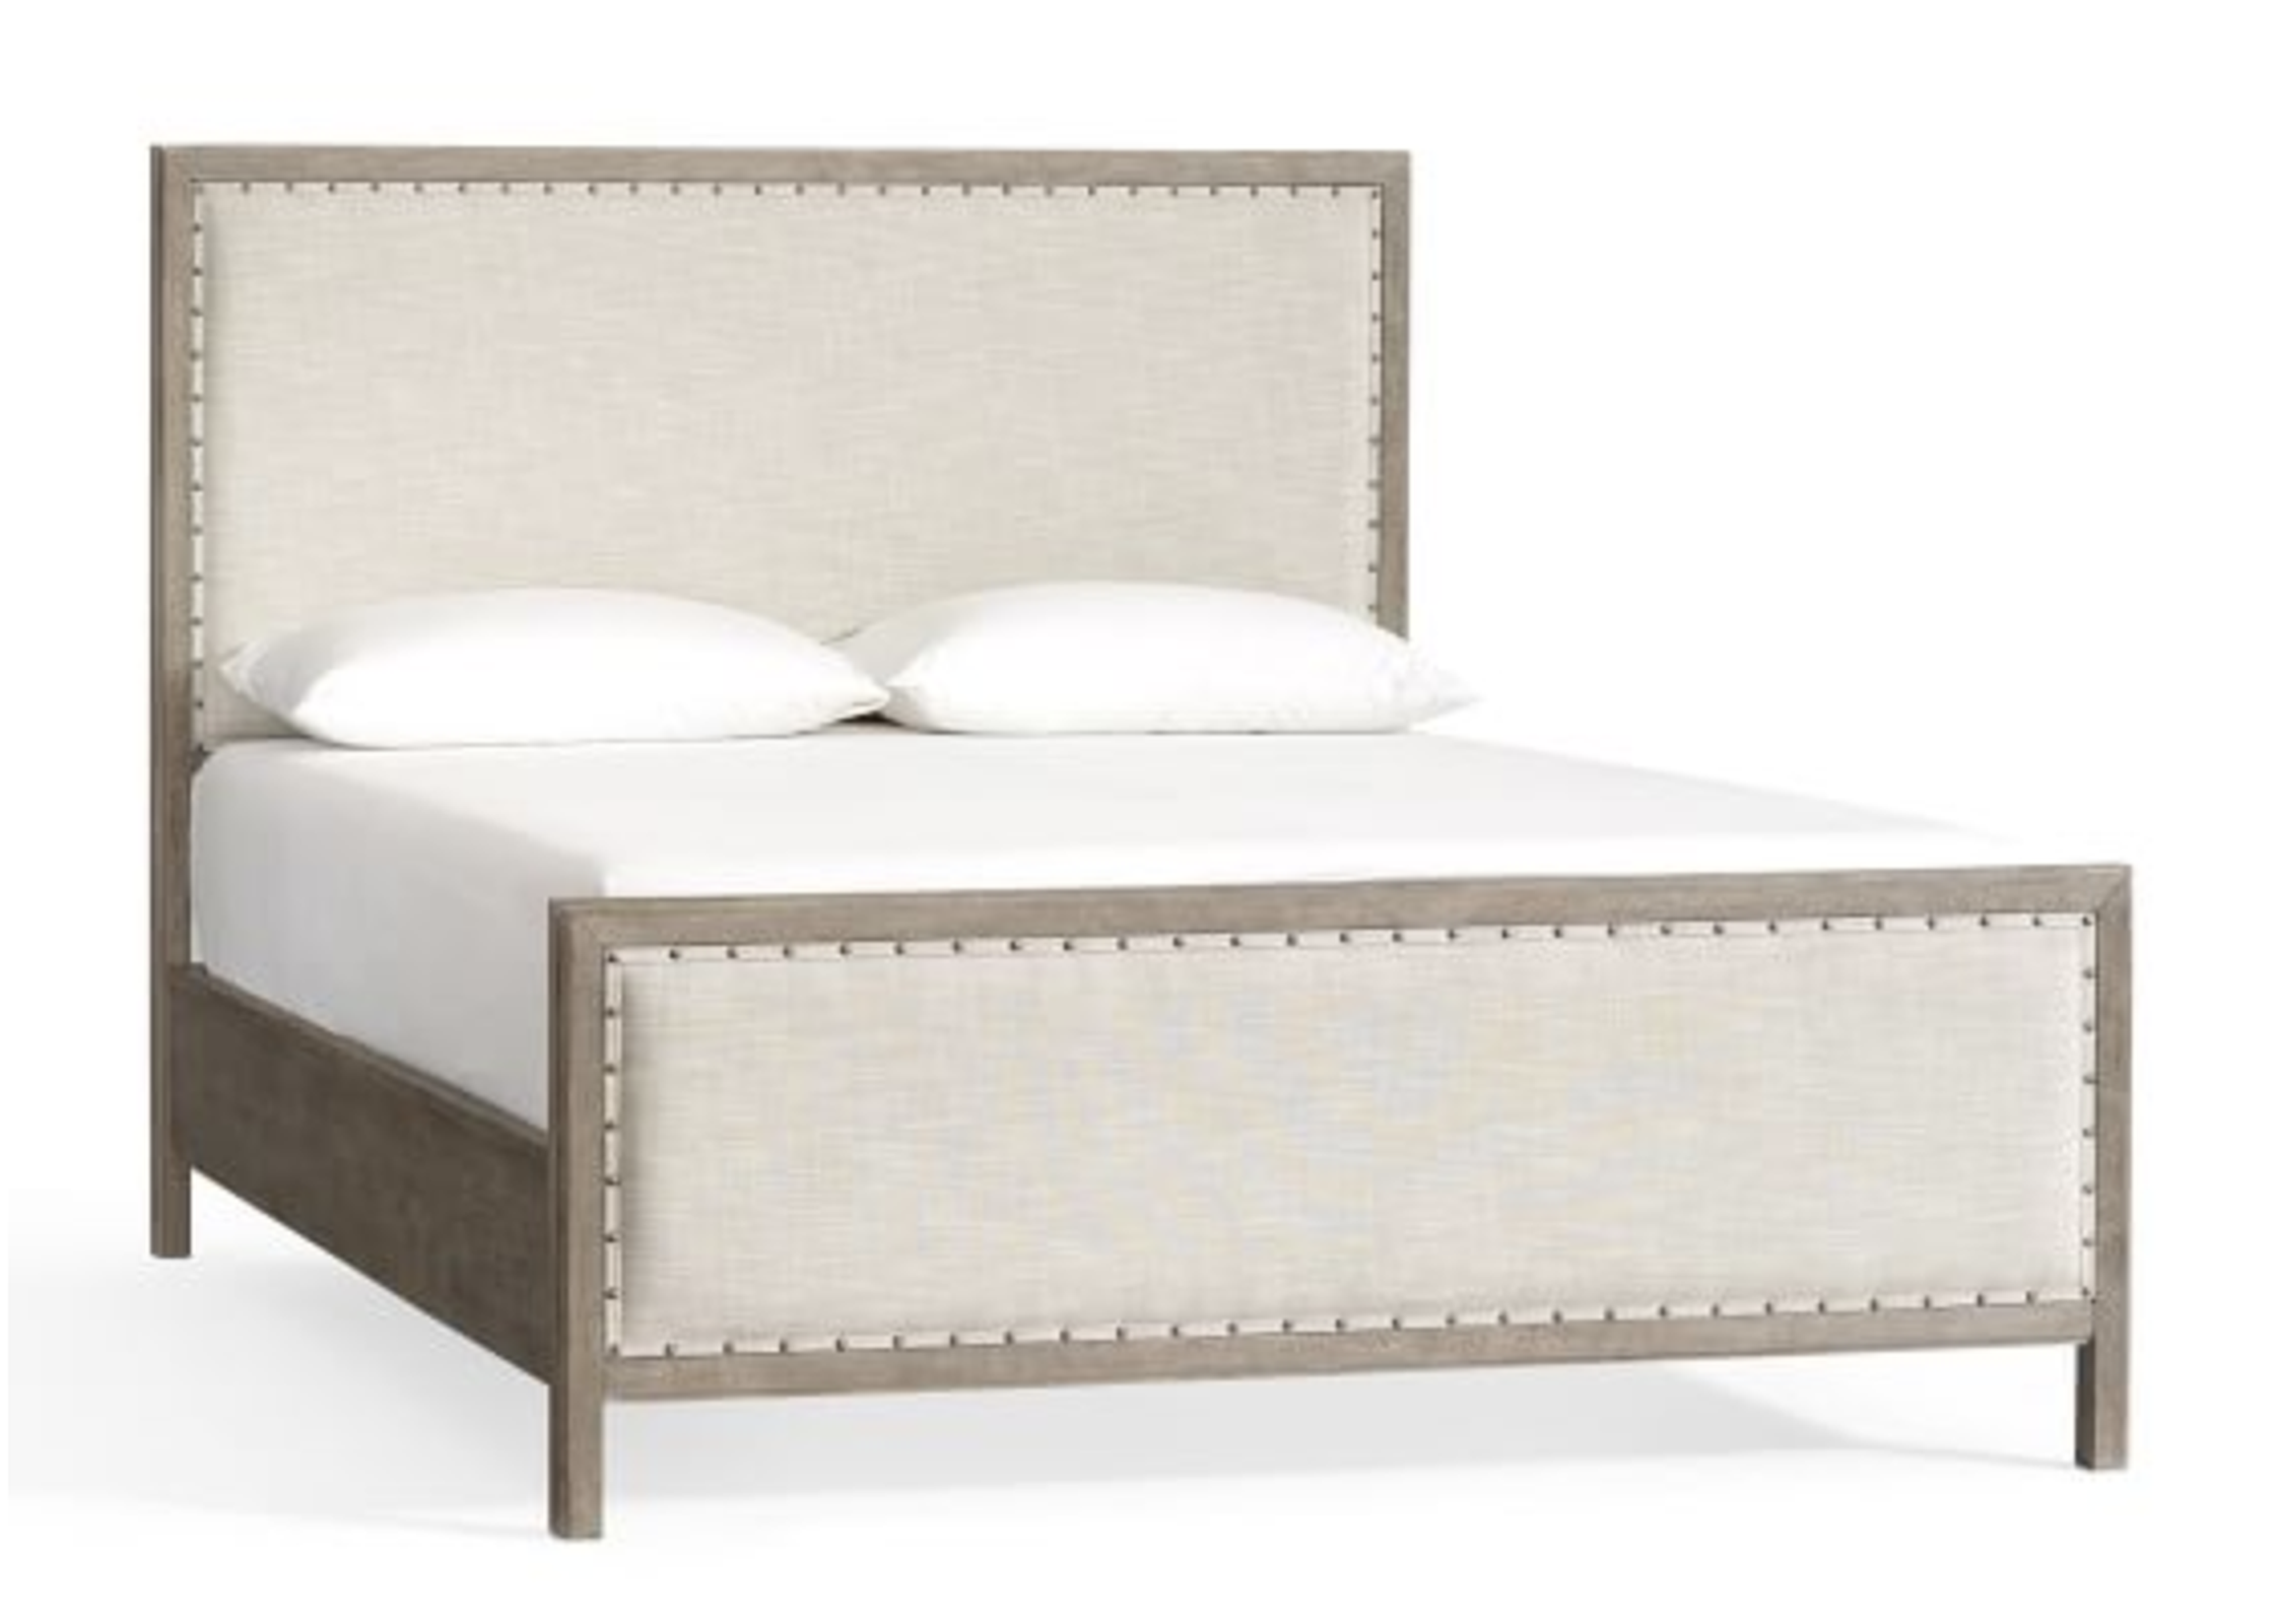 TOULOUSE WOOD BED - Pottery Barn